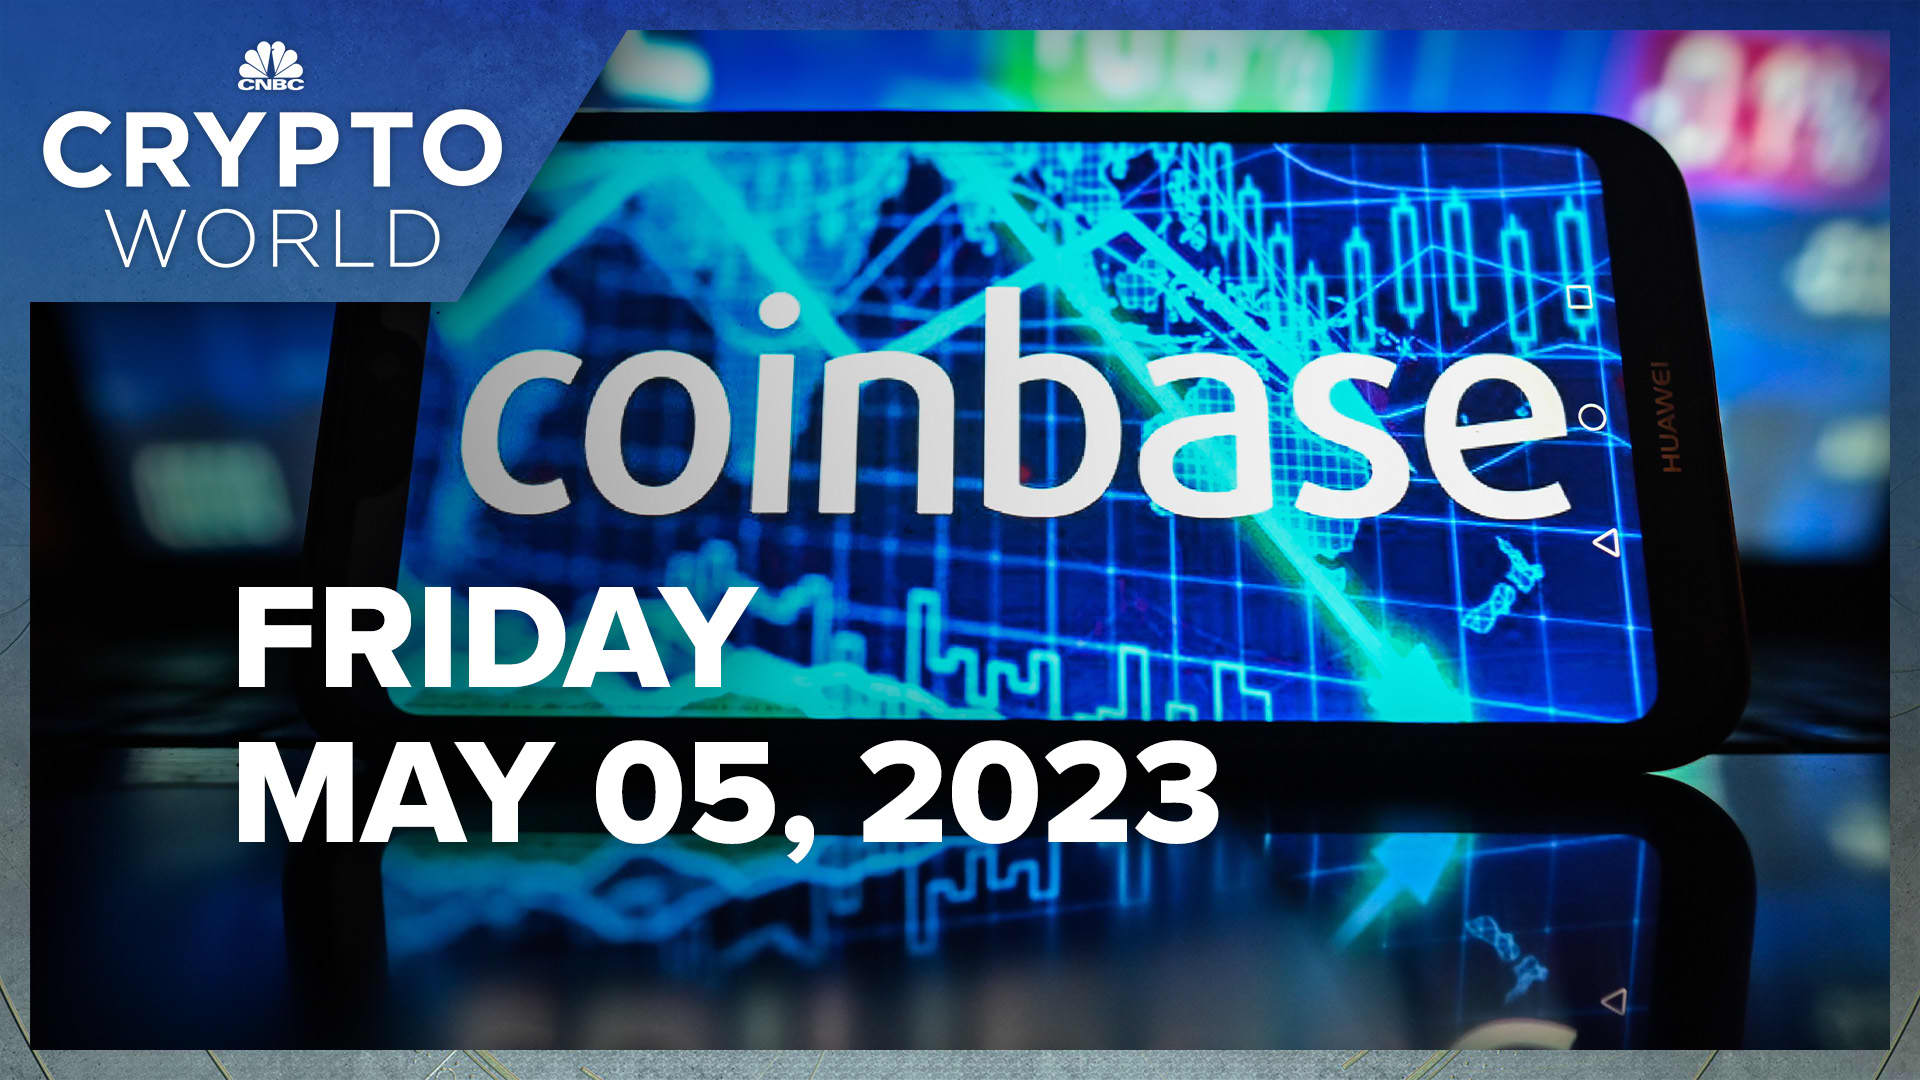 Crypto prices rise, and Coinbase shares soar after Q1 earnings beat expectations: CNBC Crypto World